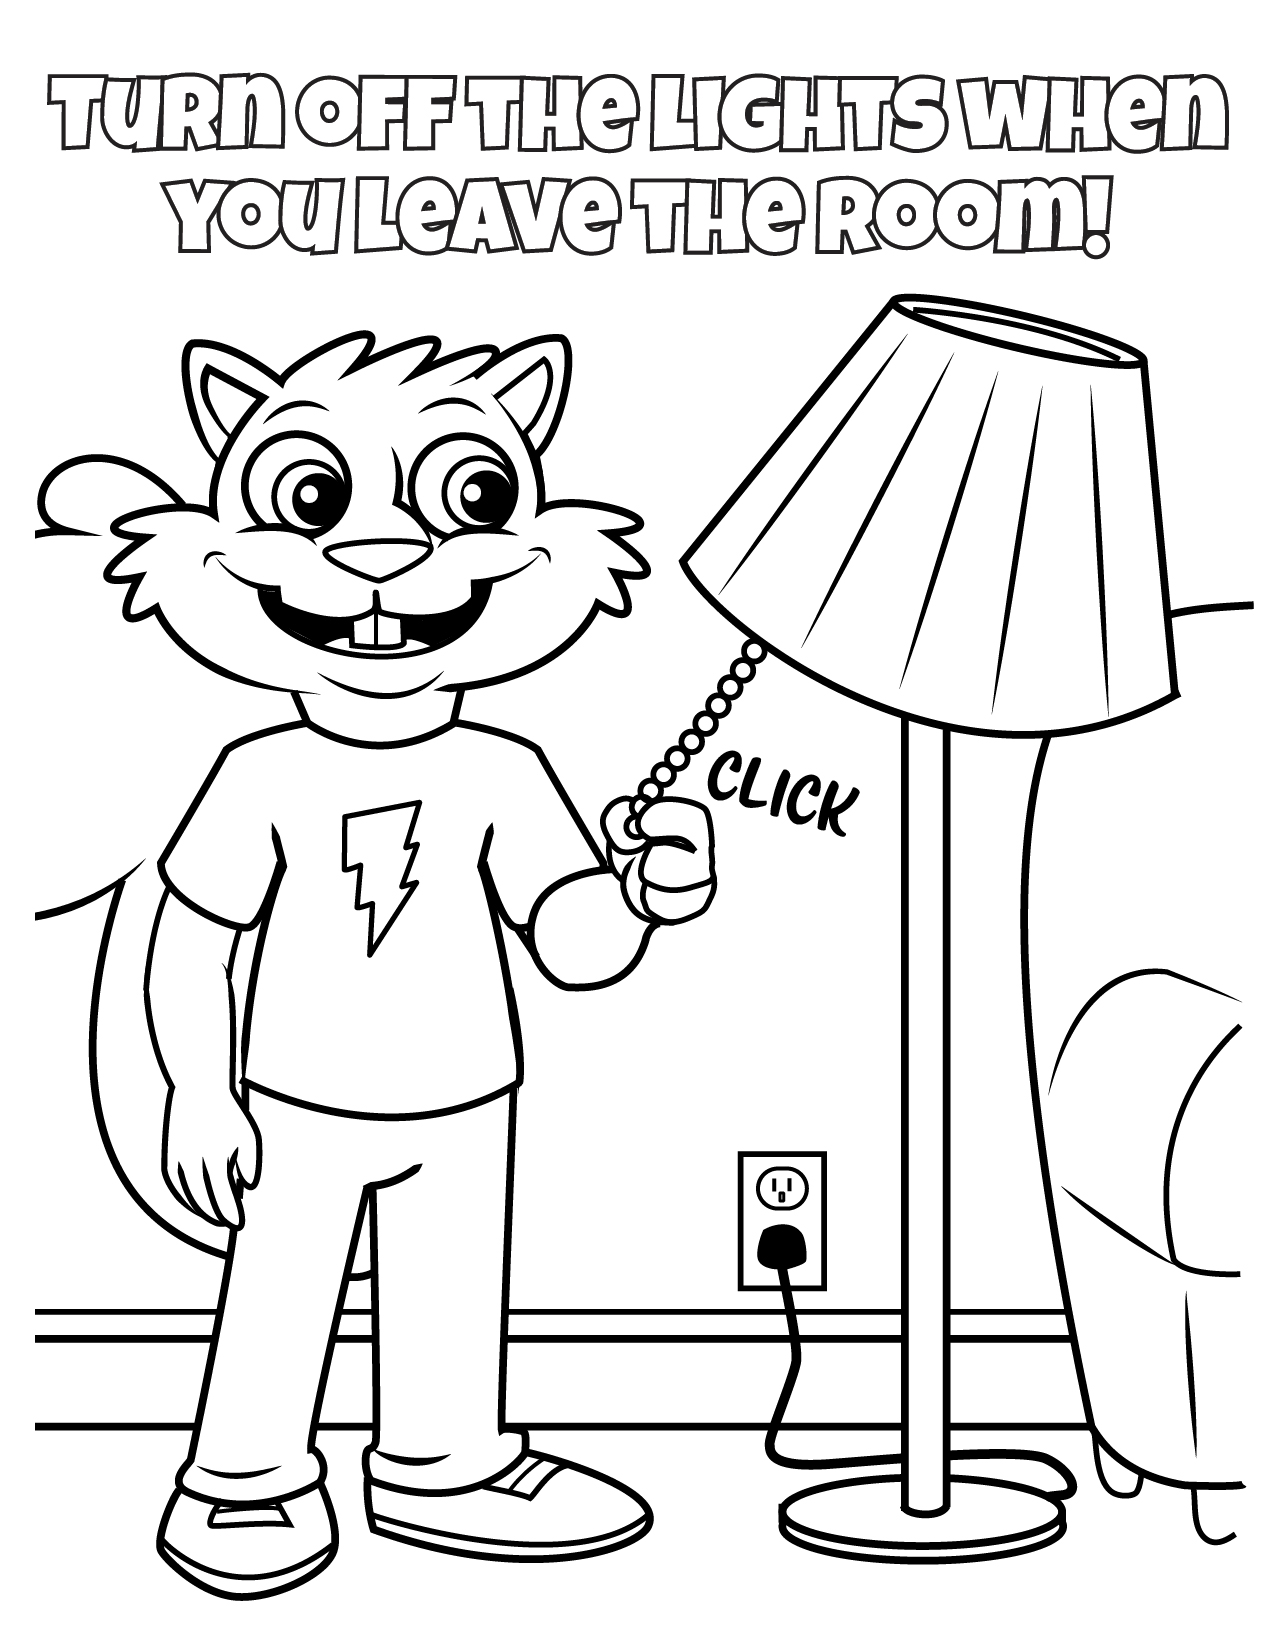 electricity-coloring-page